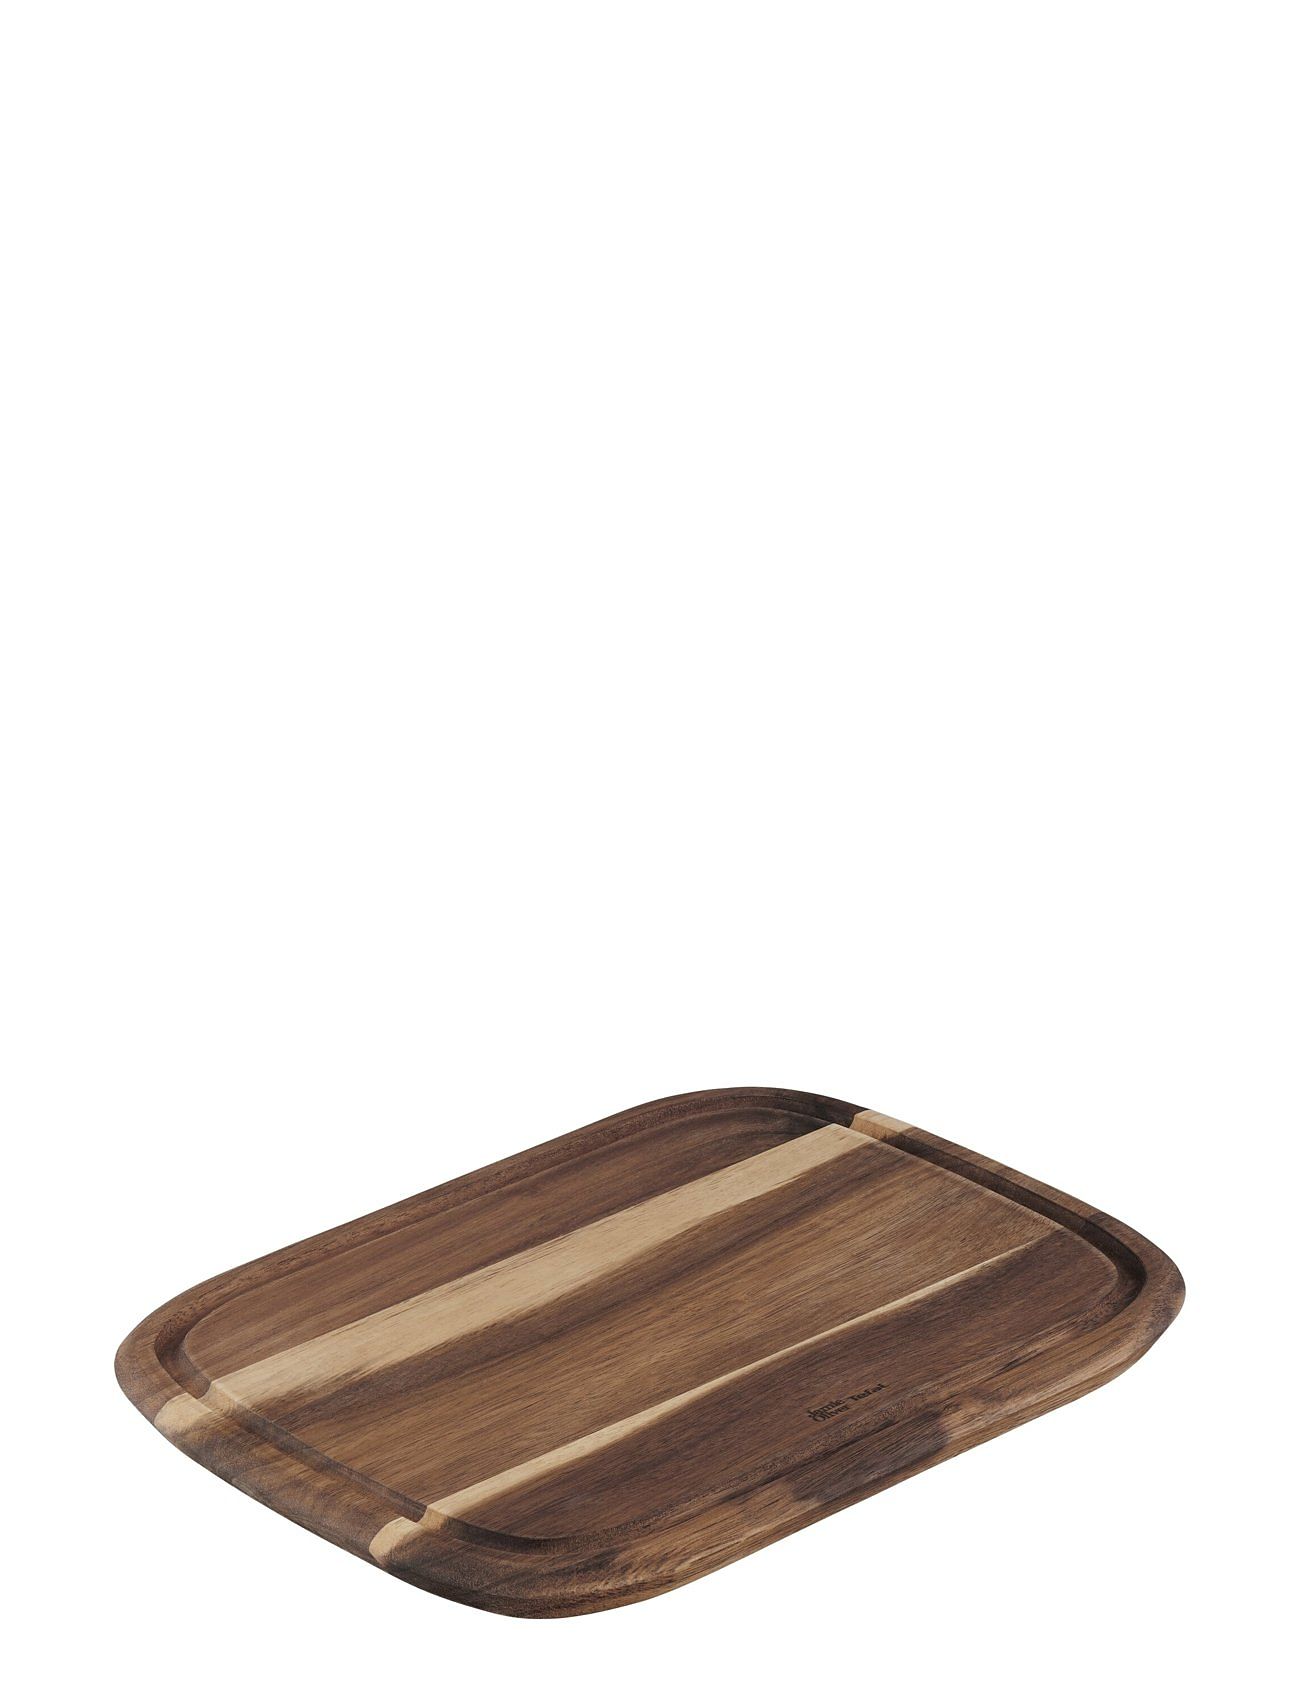 Jamie Oliver Chopping Board Small Home Kitchen Kitchen Tools Cutting Boards Wooden Cutting Boards Brown Jamie Oliver Tefal